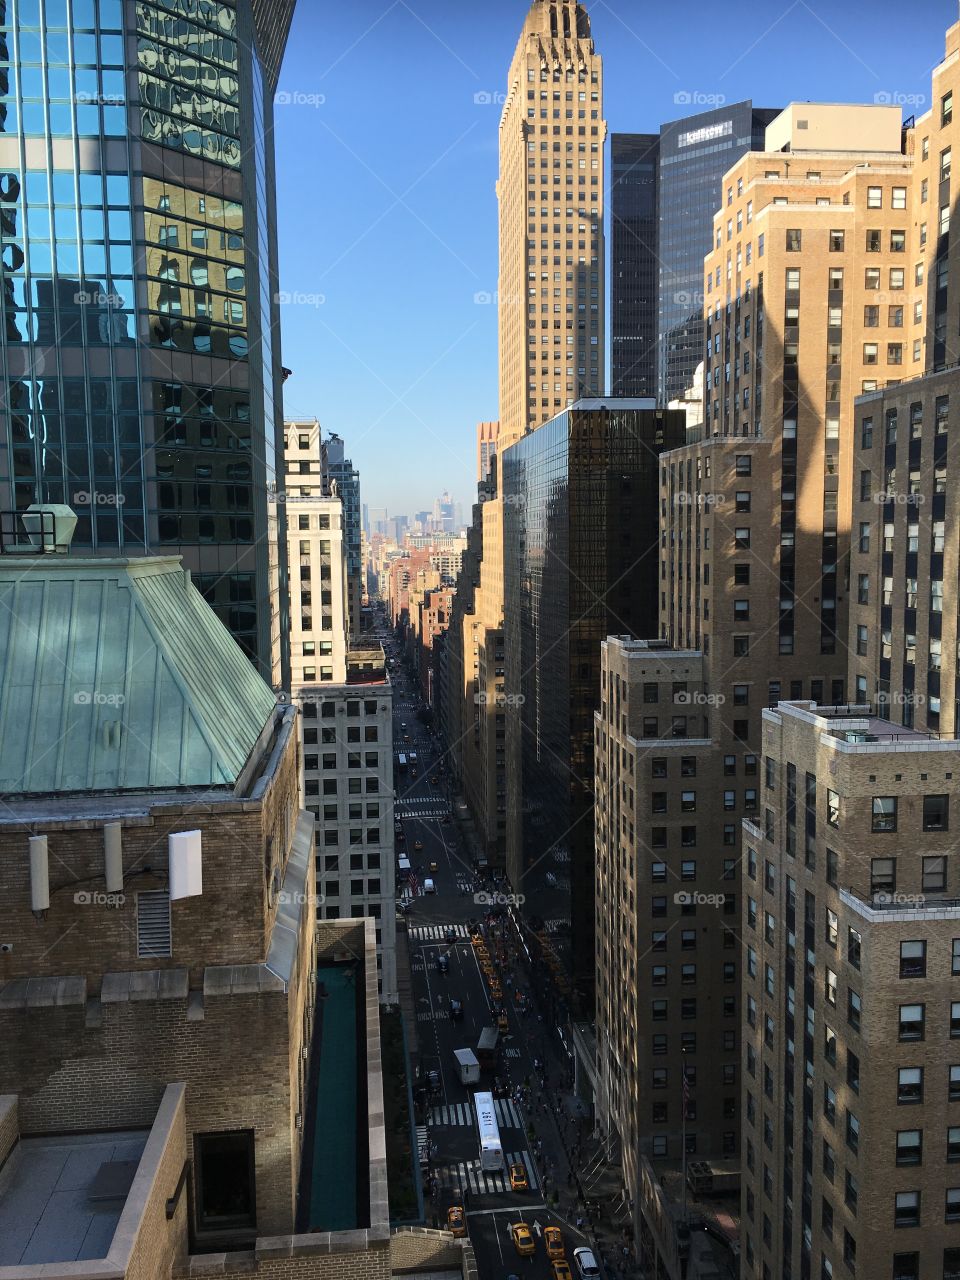 Looking down a street from the birds eye view. Beautiful shot of gorgeous Manhattan taken from a balcony, making you feel like you are flying through the city. Reflections adds to the artistic element 